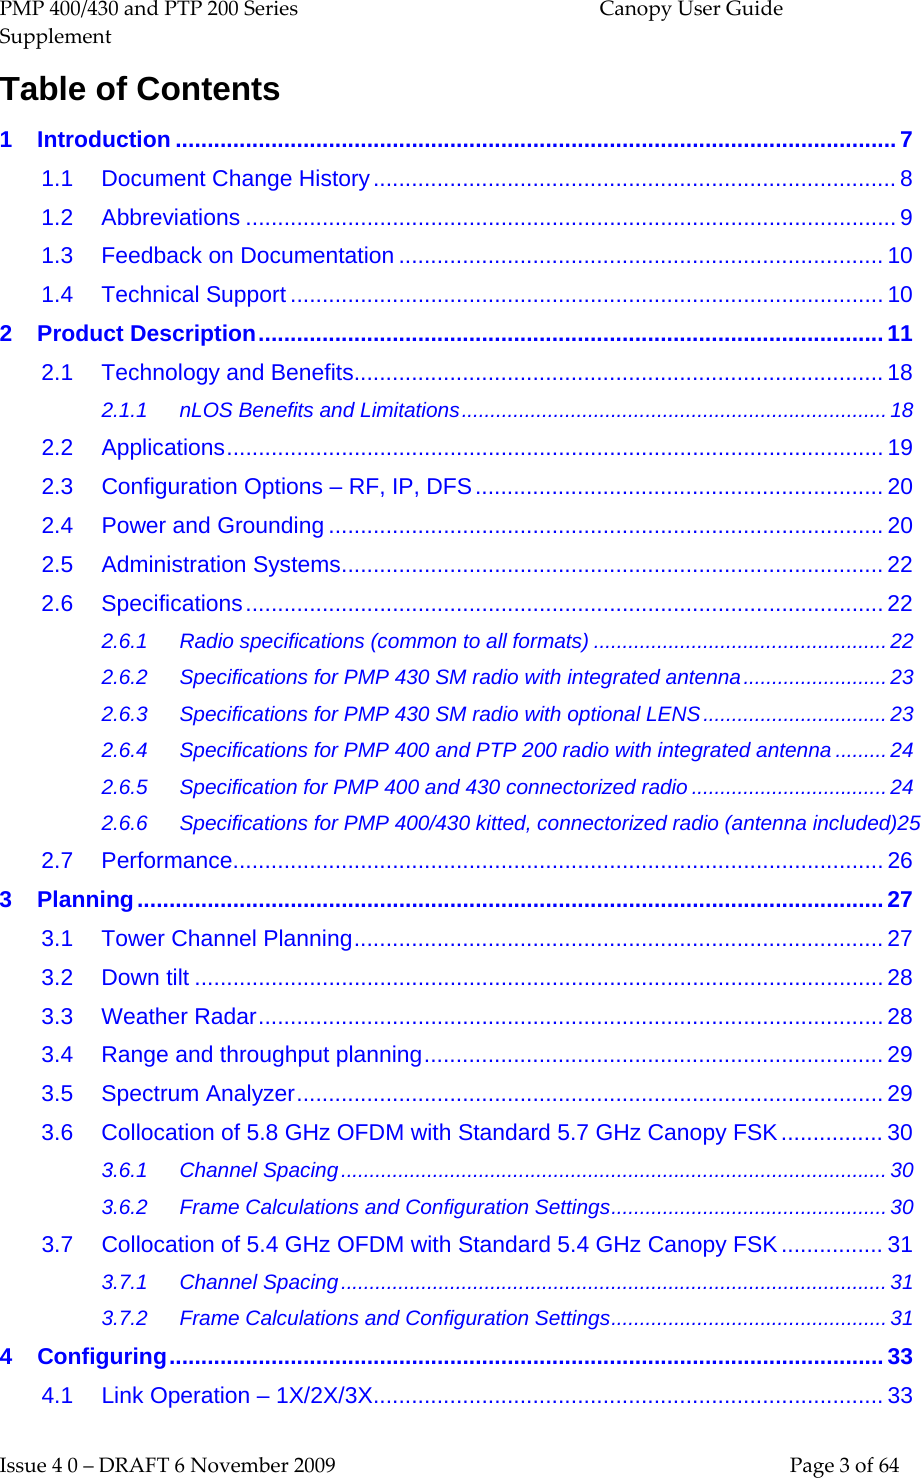 PMP 400/430 and PTP 200 Series  Canopy User Guide Supplement Issue 4 0 – DRAFT 6 November 2009    Page 3 of 64 Table of Contents 1 Introduction ................................................................................................................. 7 1.1 Document Change History .................................................................................. 8 1.2 Abbreviations ...................................................................................................... 9 1.3 Feedback on Documentation ............................................................................ 10 1.4 Technical Support ............................................................................................. 10 2 Product Description .................................................................................................. 11 2.1 Technology and Benefits ................................................................................... 18 2.1.1 nLOS Benefits and Limitations .......................................................................... 18 2.2 Applications ....................................................................................................... 19 2.3 Configuration Options – RF, IP, DFS ................................................................ 20 2.4 Power and Grounding ....................................................................................... 20 2.5 Administration Systems ..................................................................................... 22 2.6 Specifications .................................................................................................... 22 2.6.1 Radio specifications (common to all formats) ................................................... 22 2.6.2 Specifications for PMP 430 SM radio with integrated antenna ......................... 23 2.6.3 Specifications for PMP 430 SM radio with optional LENS ................................ 23 2.6.4 Specifications for PMP 400 and PTP 200 radio with integrated antenna ......... 24 2.6.5 Specification for PMP 400 and 430 connectorized radio .................................. 24 2.6.6 Specifications for PMP 400/430 kitted, connectorized radio (antenna included)25 2.7 Performance...................................................................................................... 26 3 Planning ..................................................................................................................... 27 3.1 Tower Channel Planning ................................................................................... 27 3.2 Down tilt ............................................................................................................ 28 3.3 Weather Radar .................................................................................................. 28 3.4 Range and throughput planning ........................................................................ 29 3.5 Spectrum Analyzer ............................................................................................ 29 3.6 Collocation of 5.8 GHz OFDM with Standard 5.7 GHz Canopy FSK ................ 30 3.6.1 Channel Spacing ............................................................................................... 30 3.6.2 Frame Calculations and Configuration Settings ................................................ 30 3.7 Collocation of 5.4 GHz OFDM with Standard 5.4 GHz Canopy FSK ................ 31 3.7.1 Channel Spacing ............................................................................................... 31 3.7.2 Frame Calculations and Configuration Settings ................................................ 31 4 Configuring ................................................................................................................ 33 4.1 Link Operation – 1X/2X/3X ................................................................................ 33 